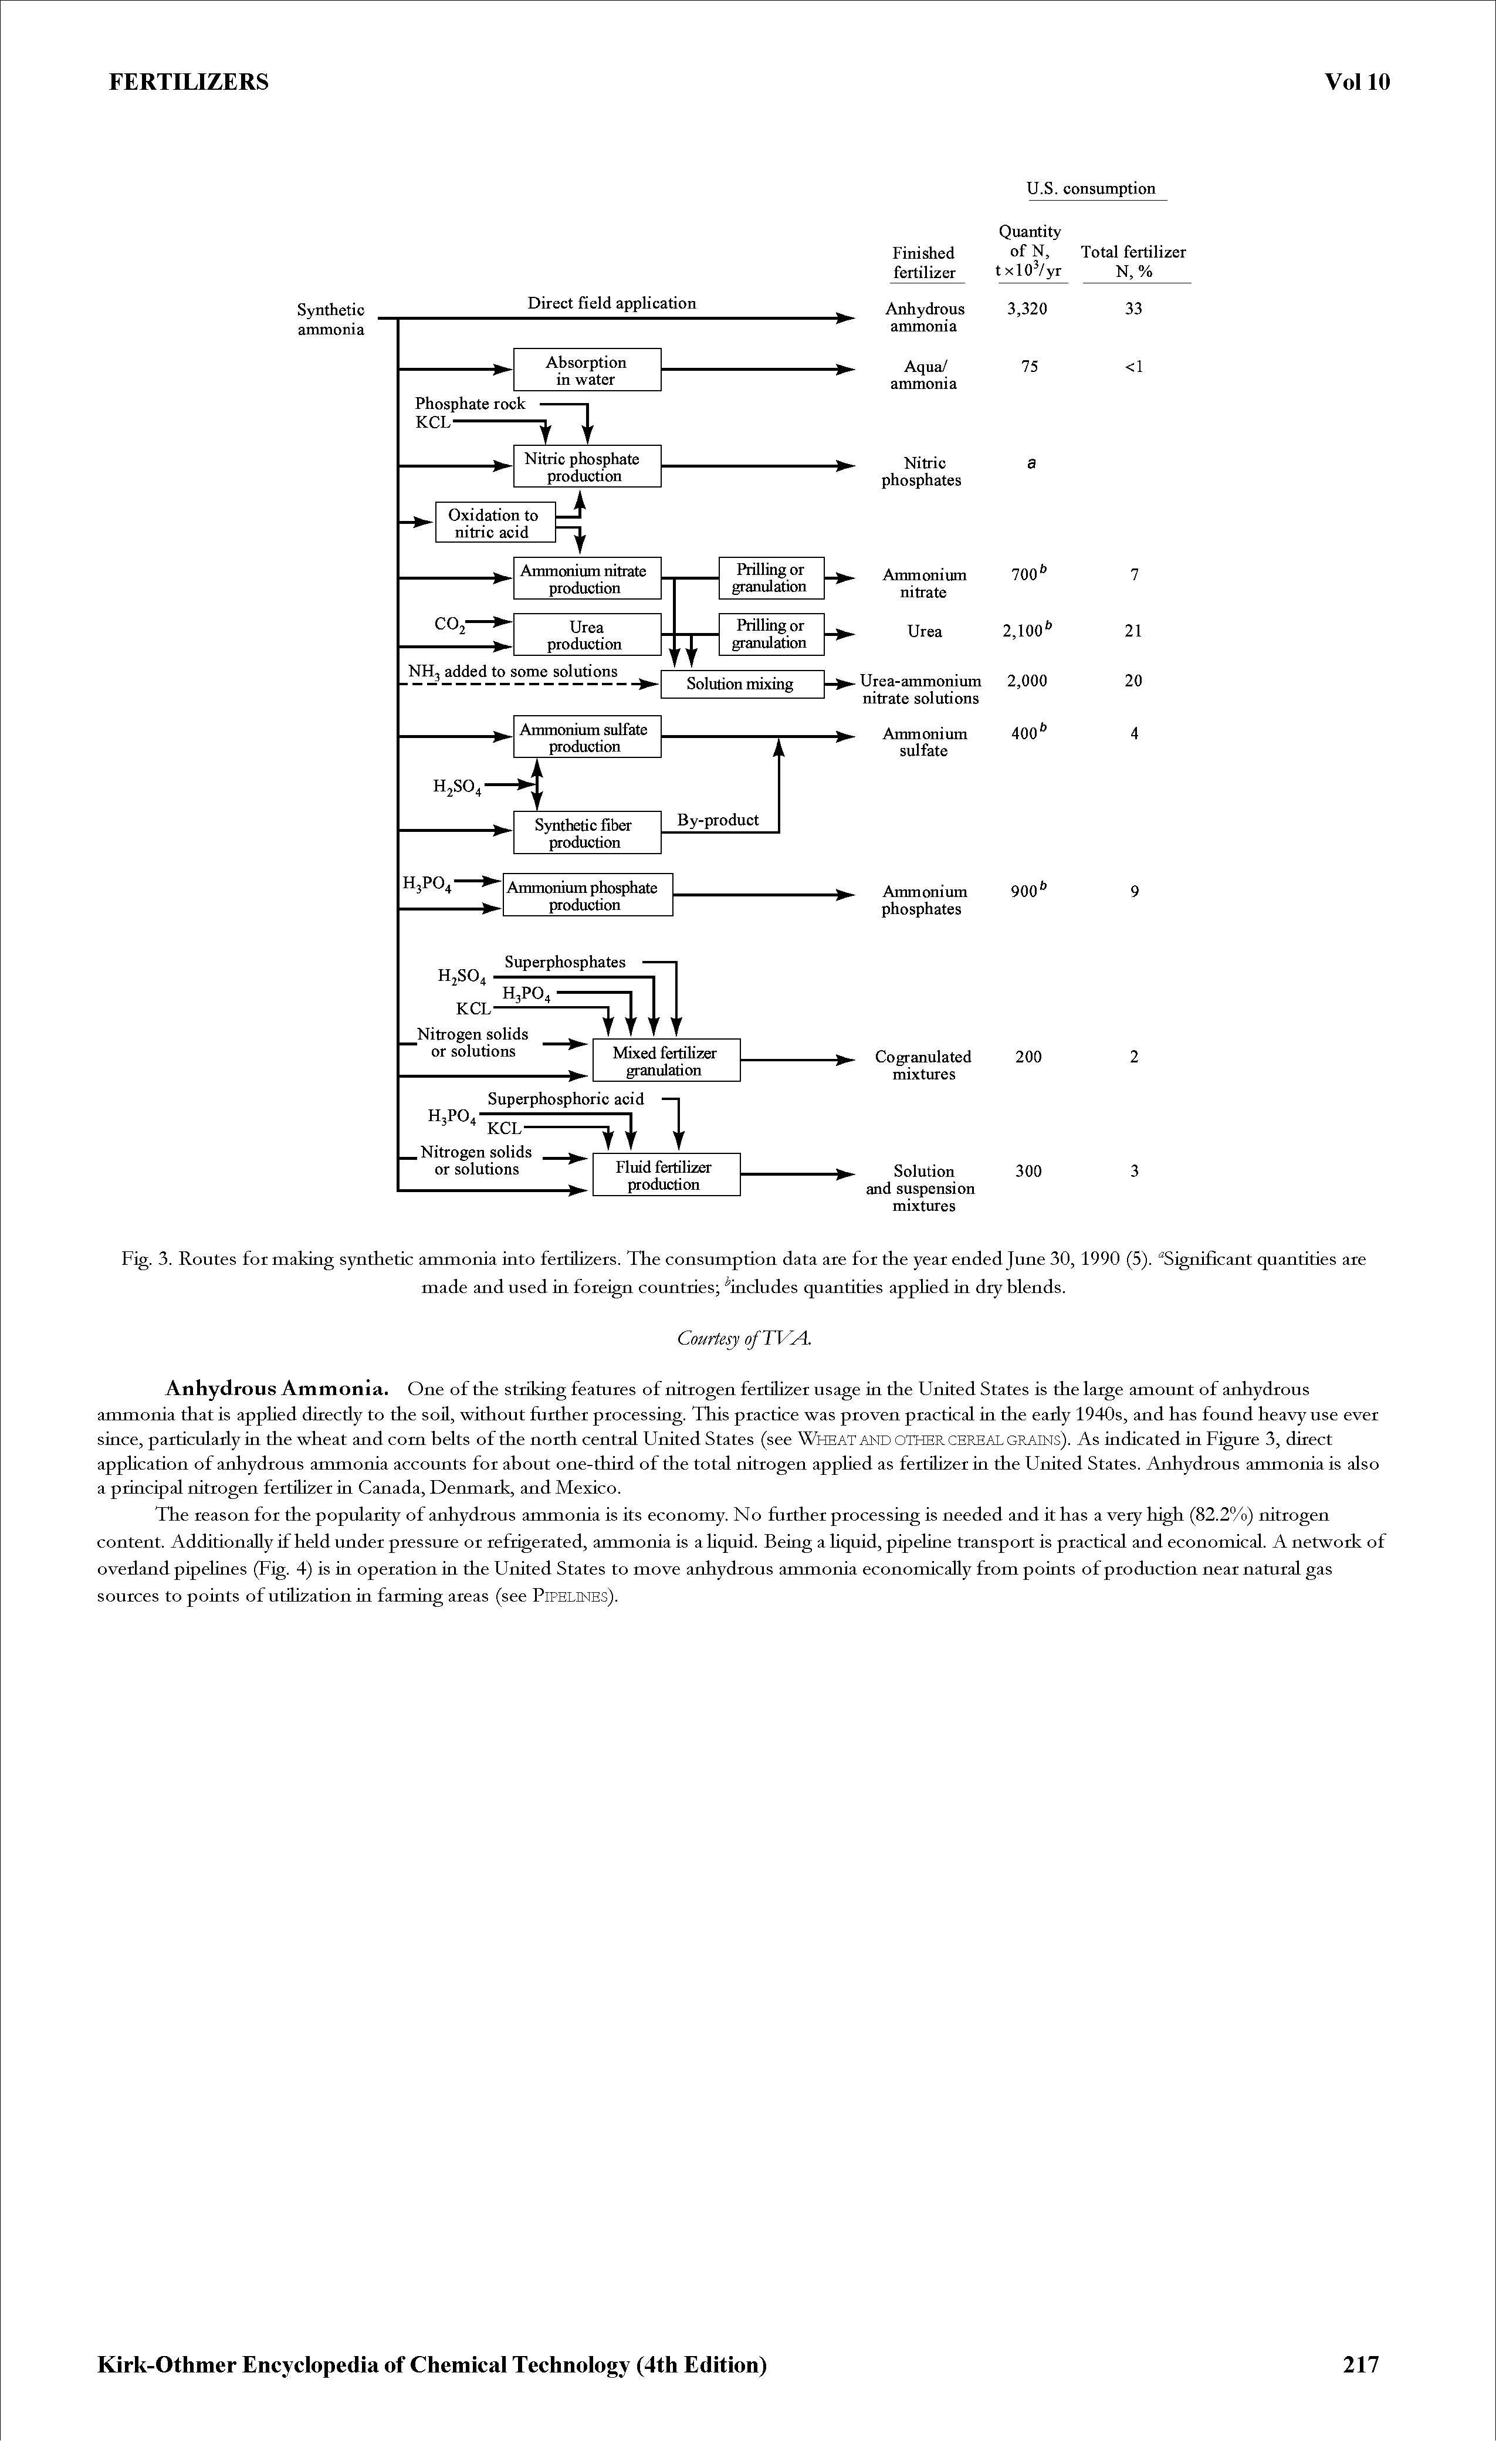 Fig. 3. Routes for making synthetic ammonia into fertilizers. The consumption data are for the year ended June 30, 1990 (5). Significant quantities are...